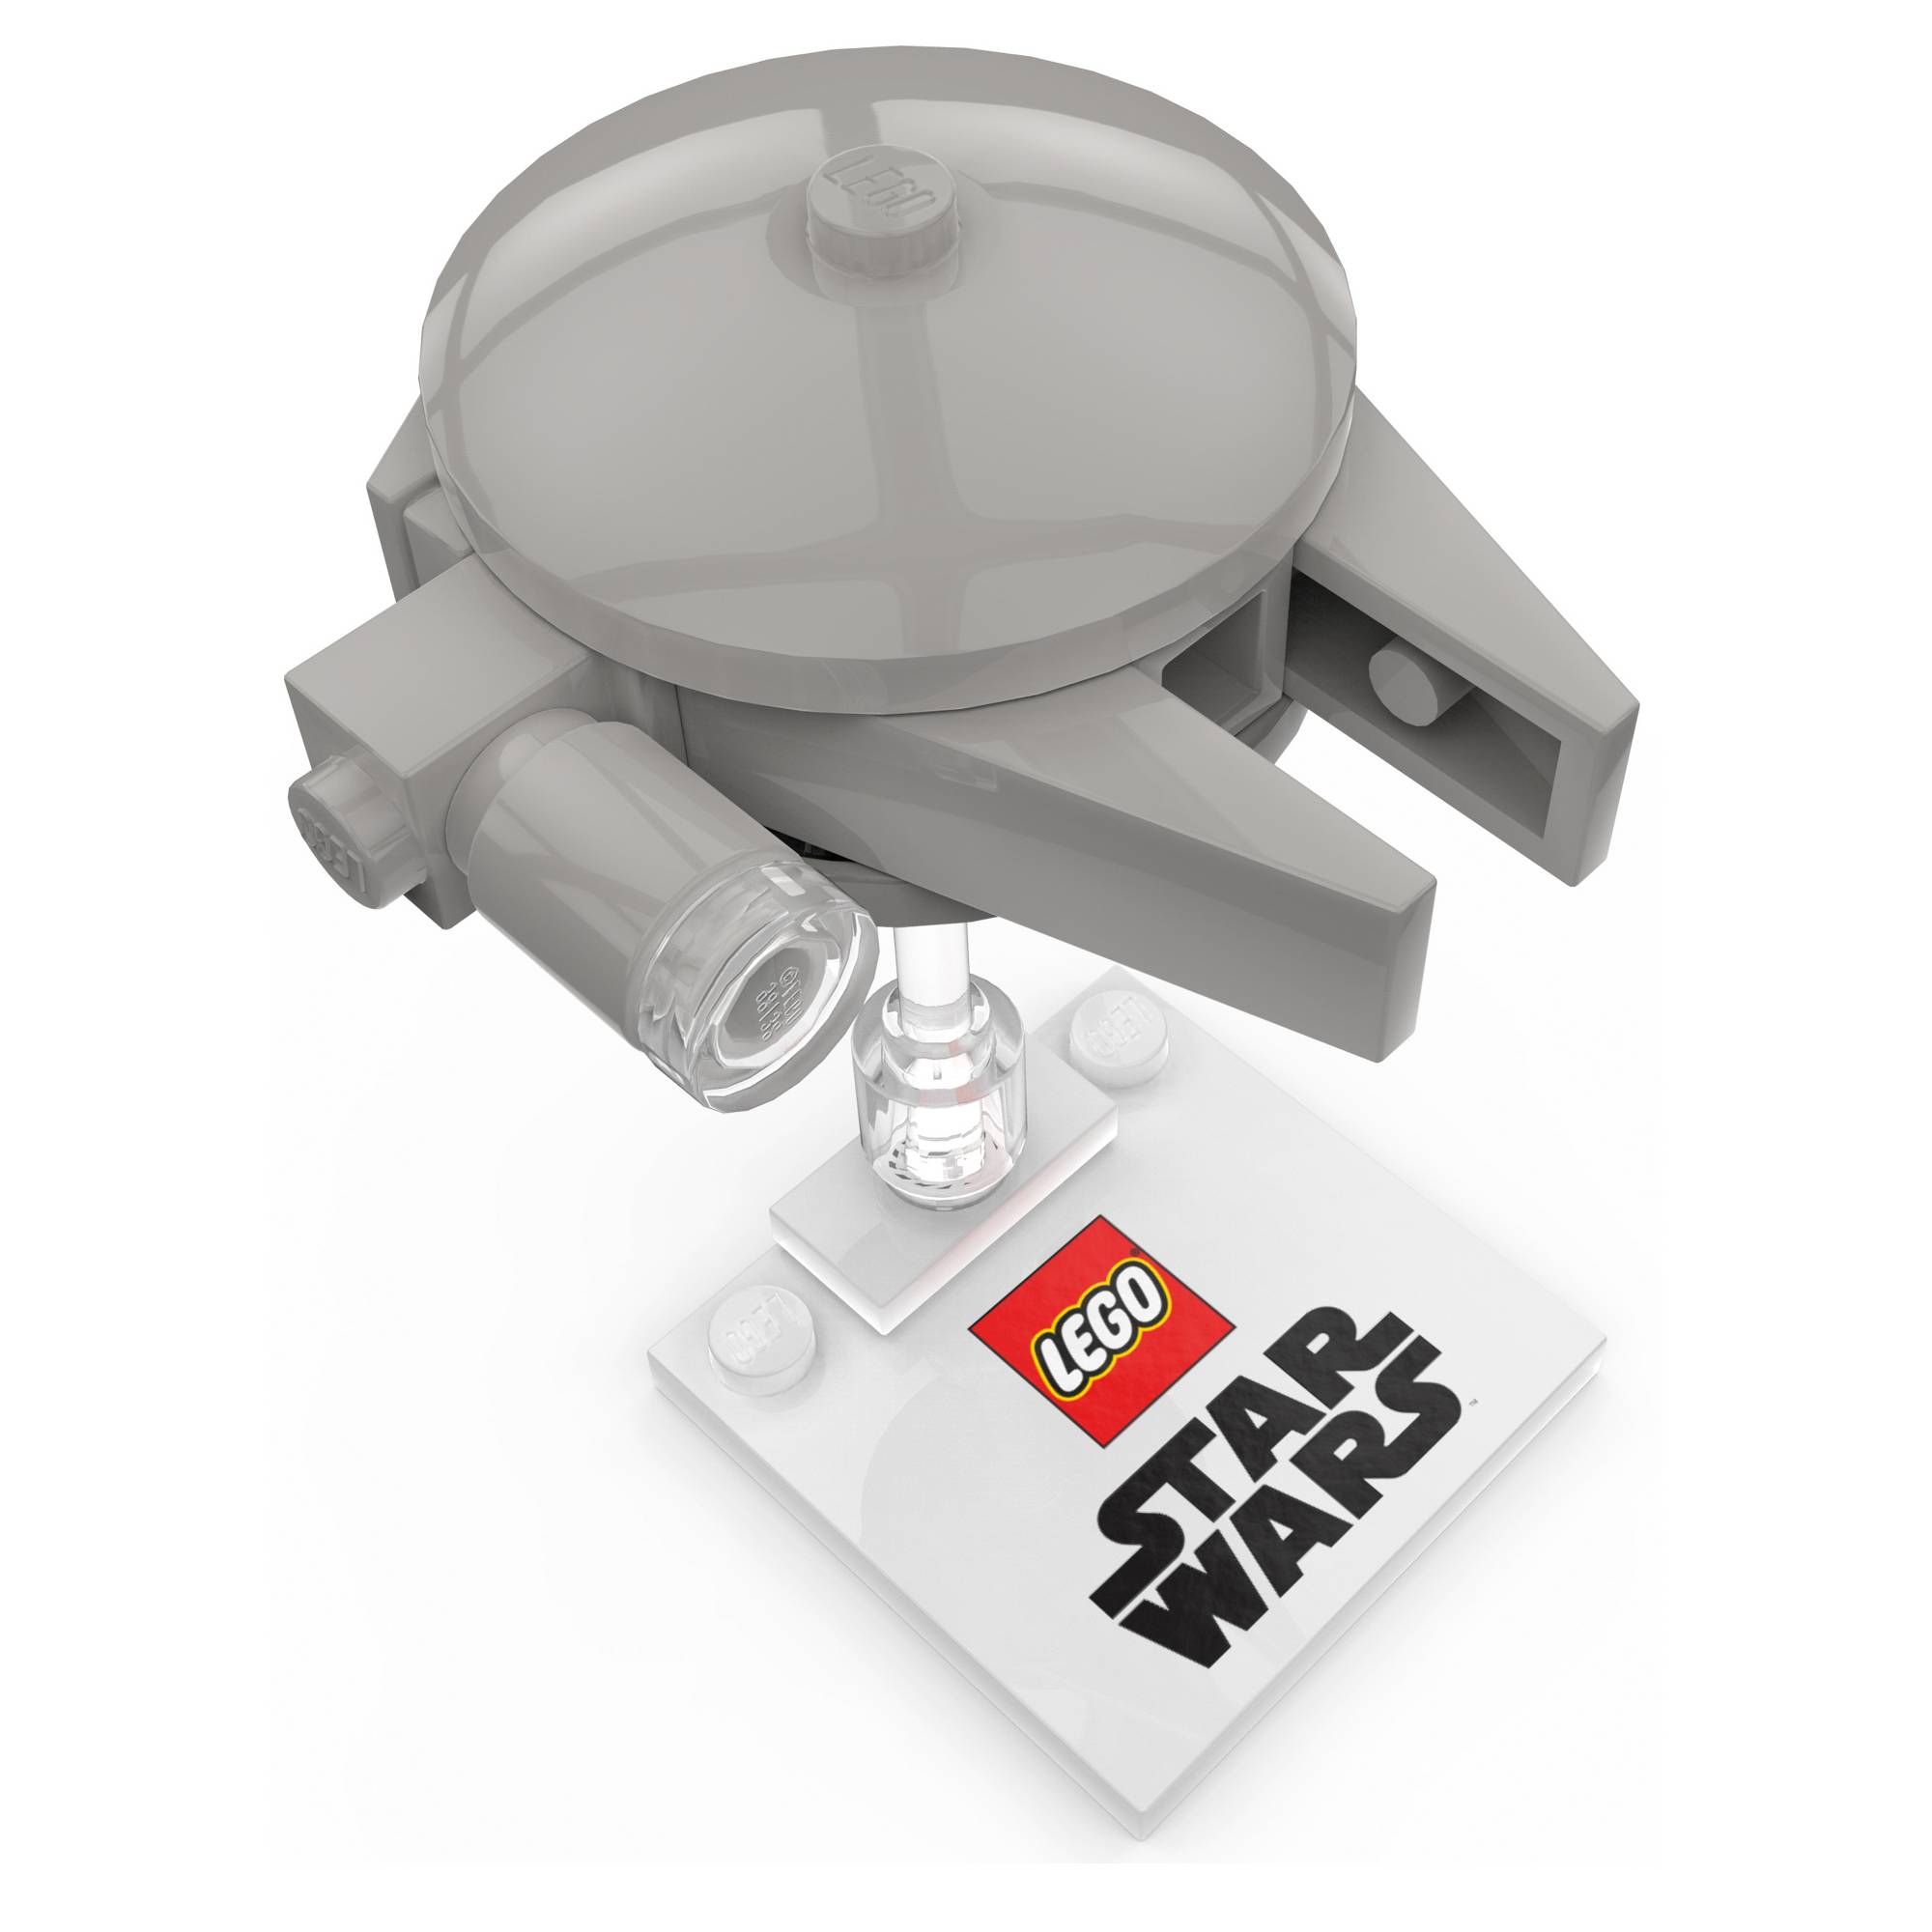 Target Online Selling Micro Millennium Falcon; Some LEGO Discounted by 20%  - FBTB